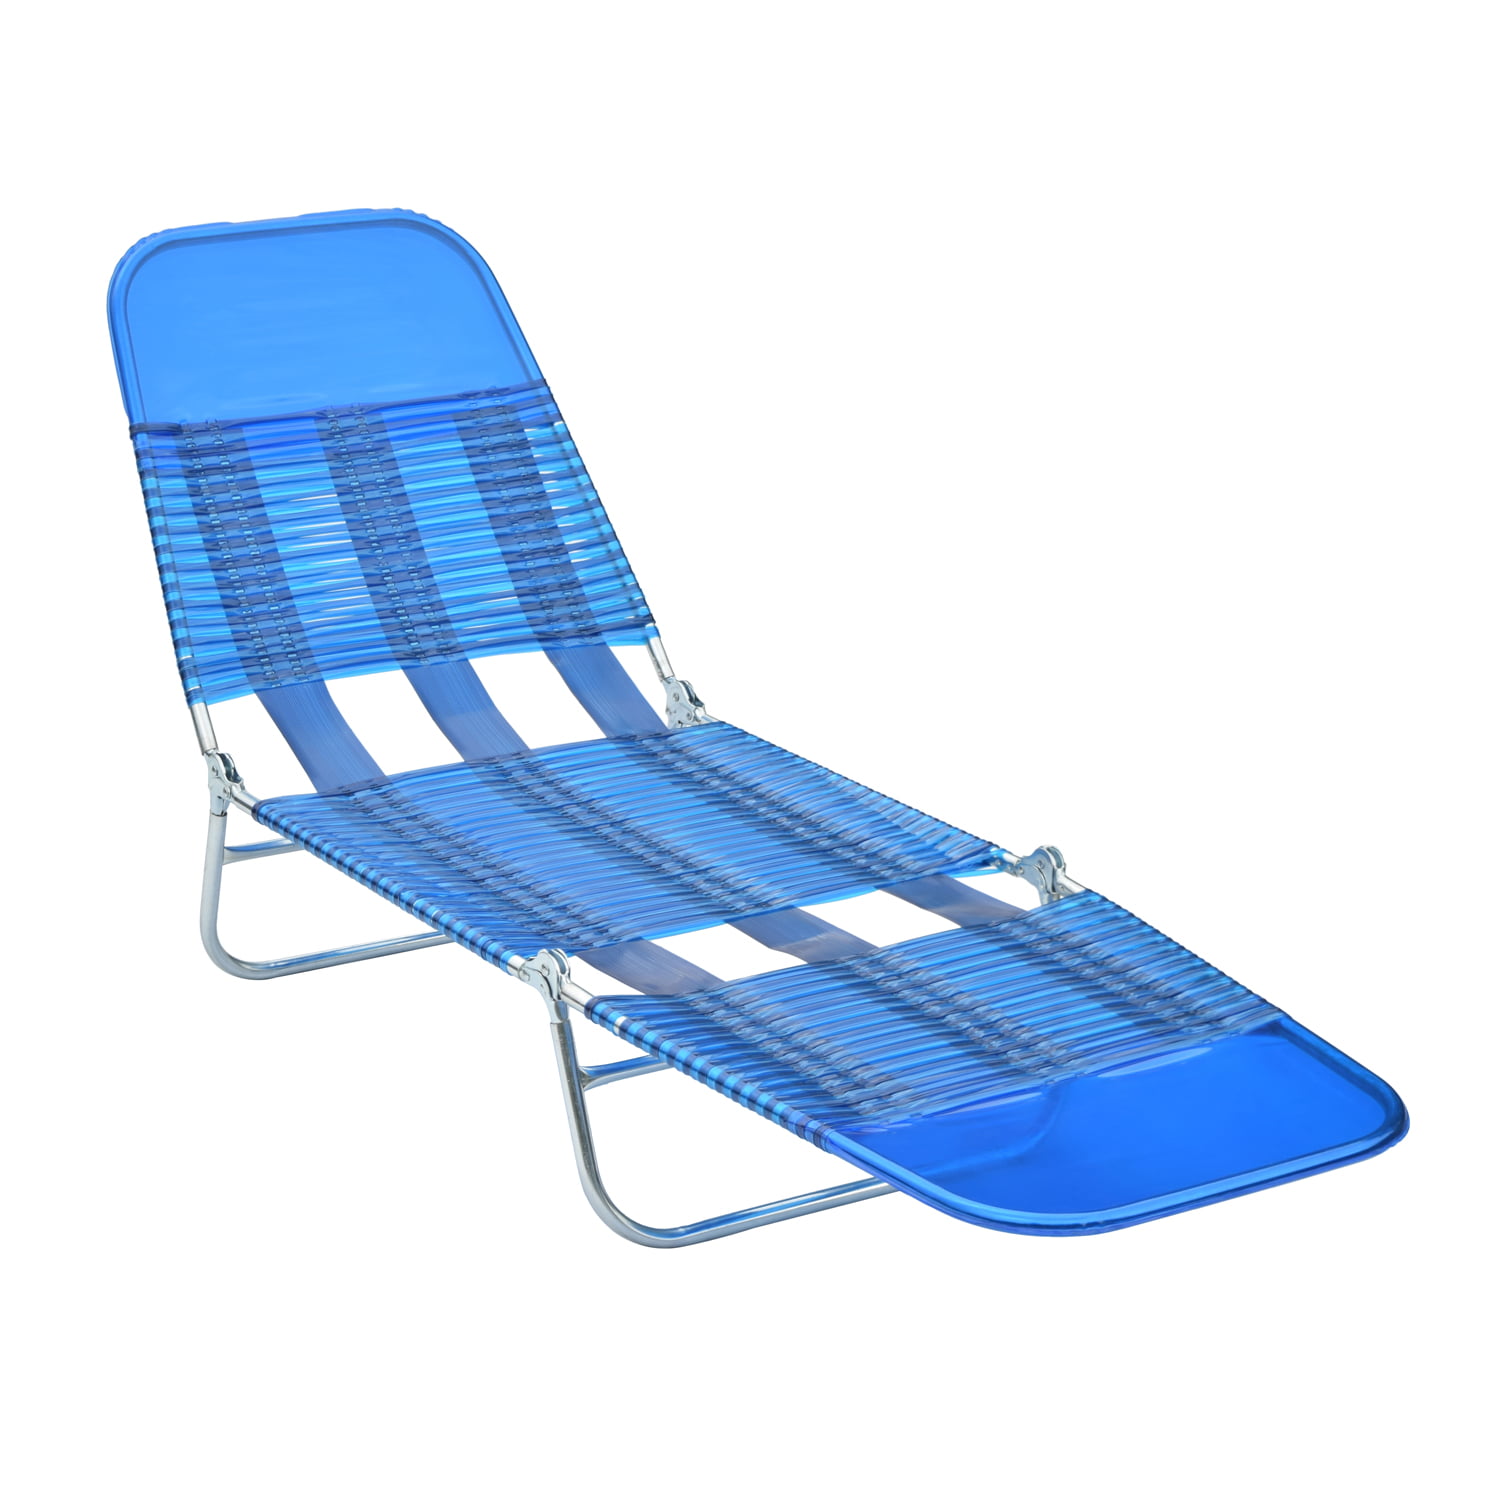 New Folding Jelly Beach Lounge Chair for Large Space